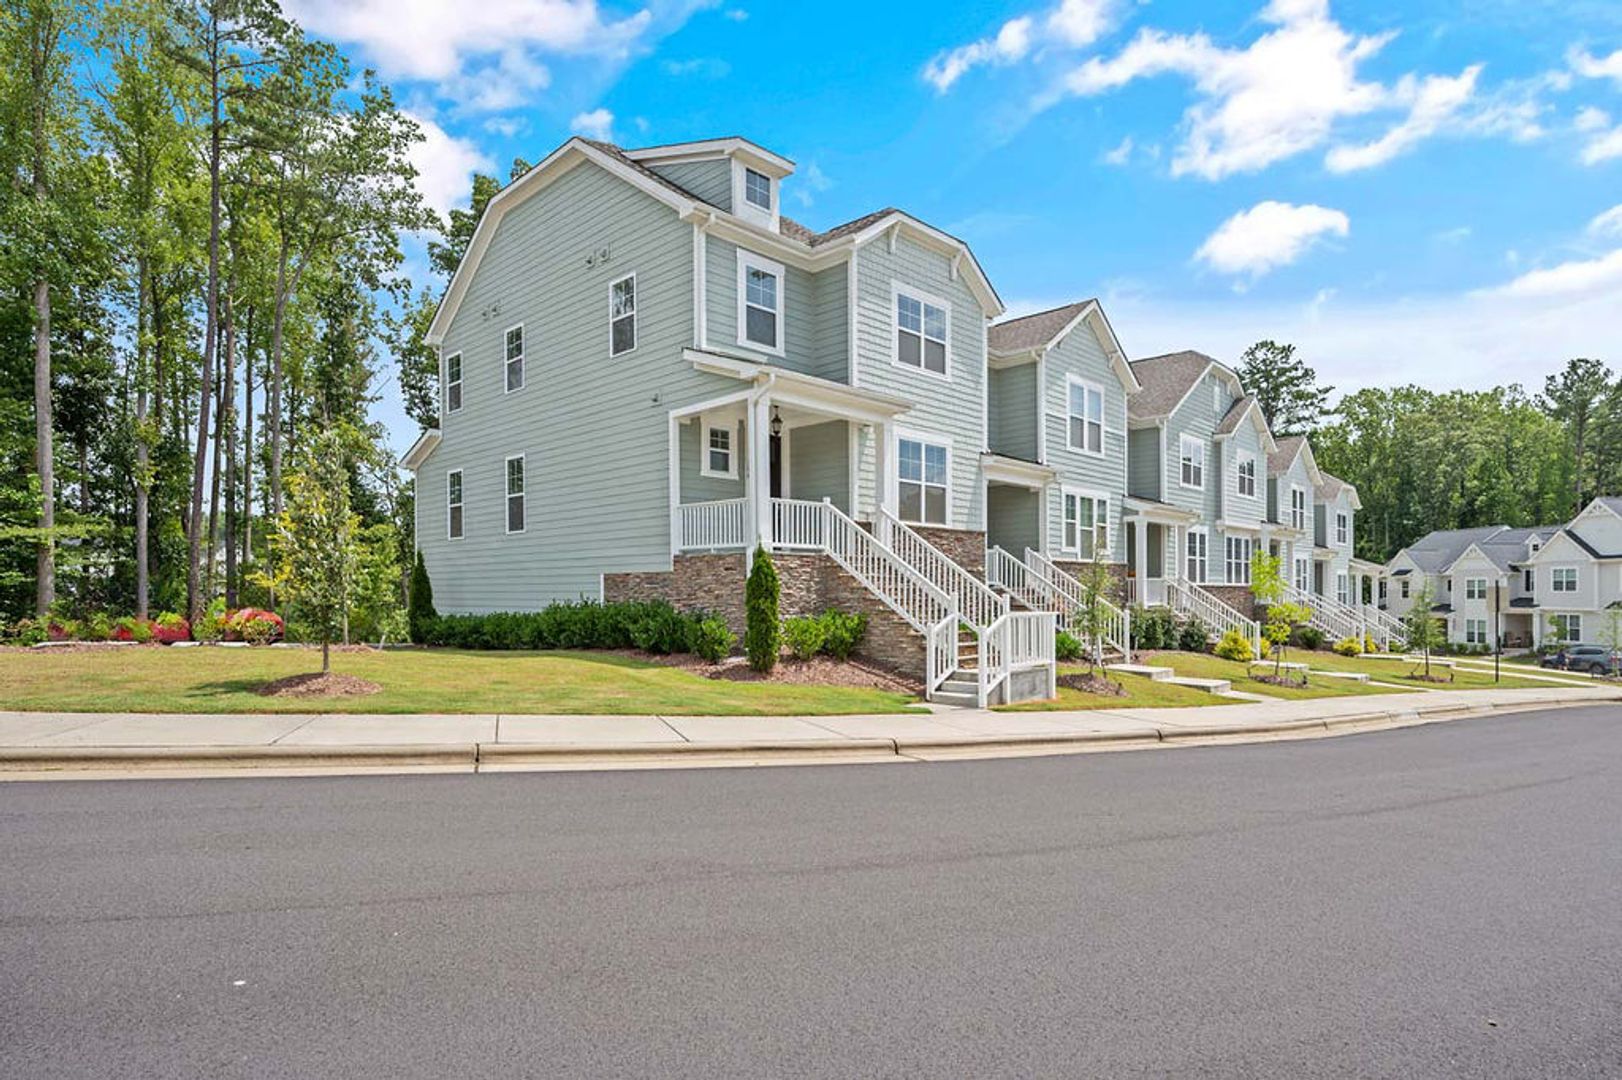 Immaculate 3 Bedroom Townhome in the Exquisite Wake Forest Neighborhood of Carraway Gardens at Tryon!